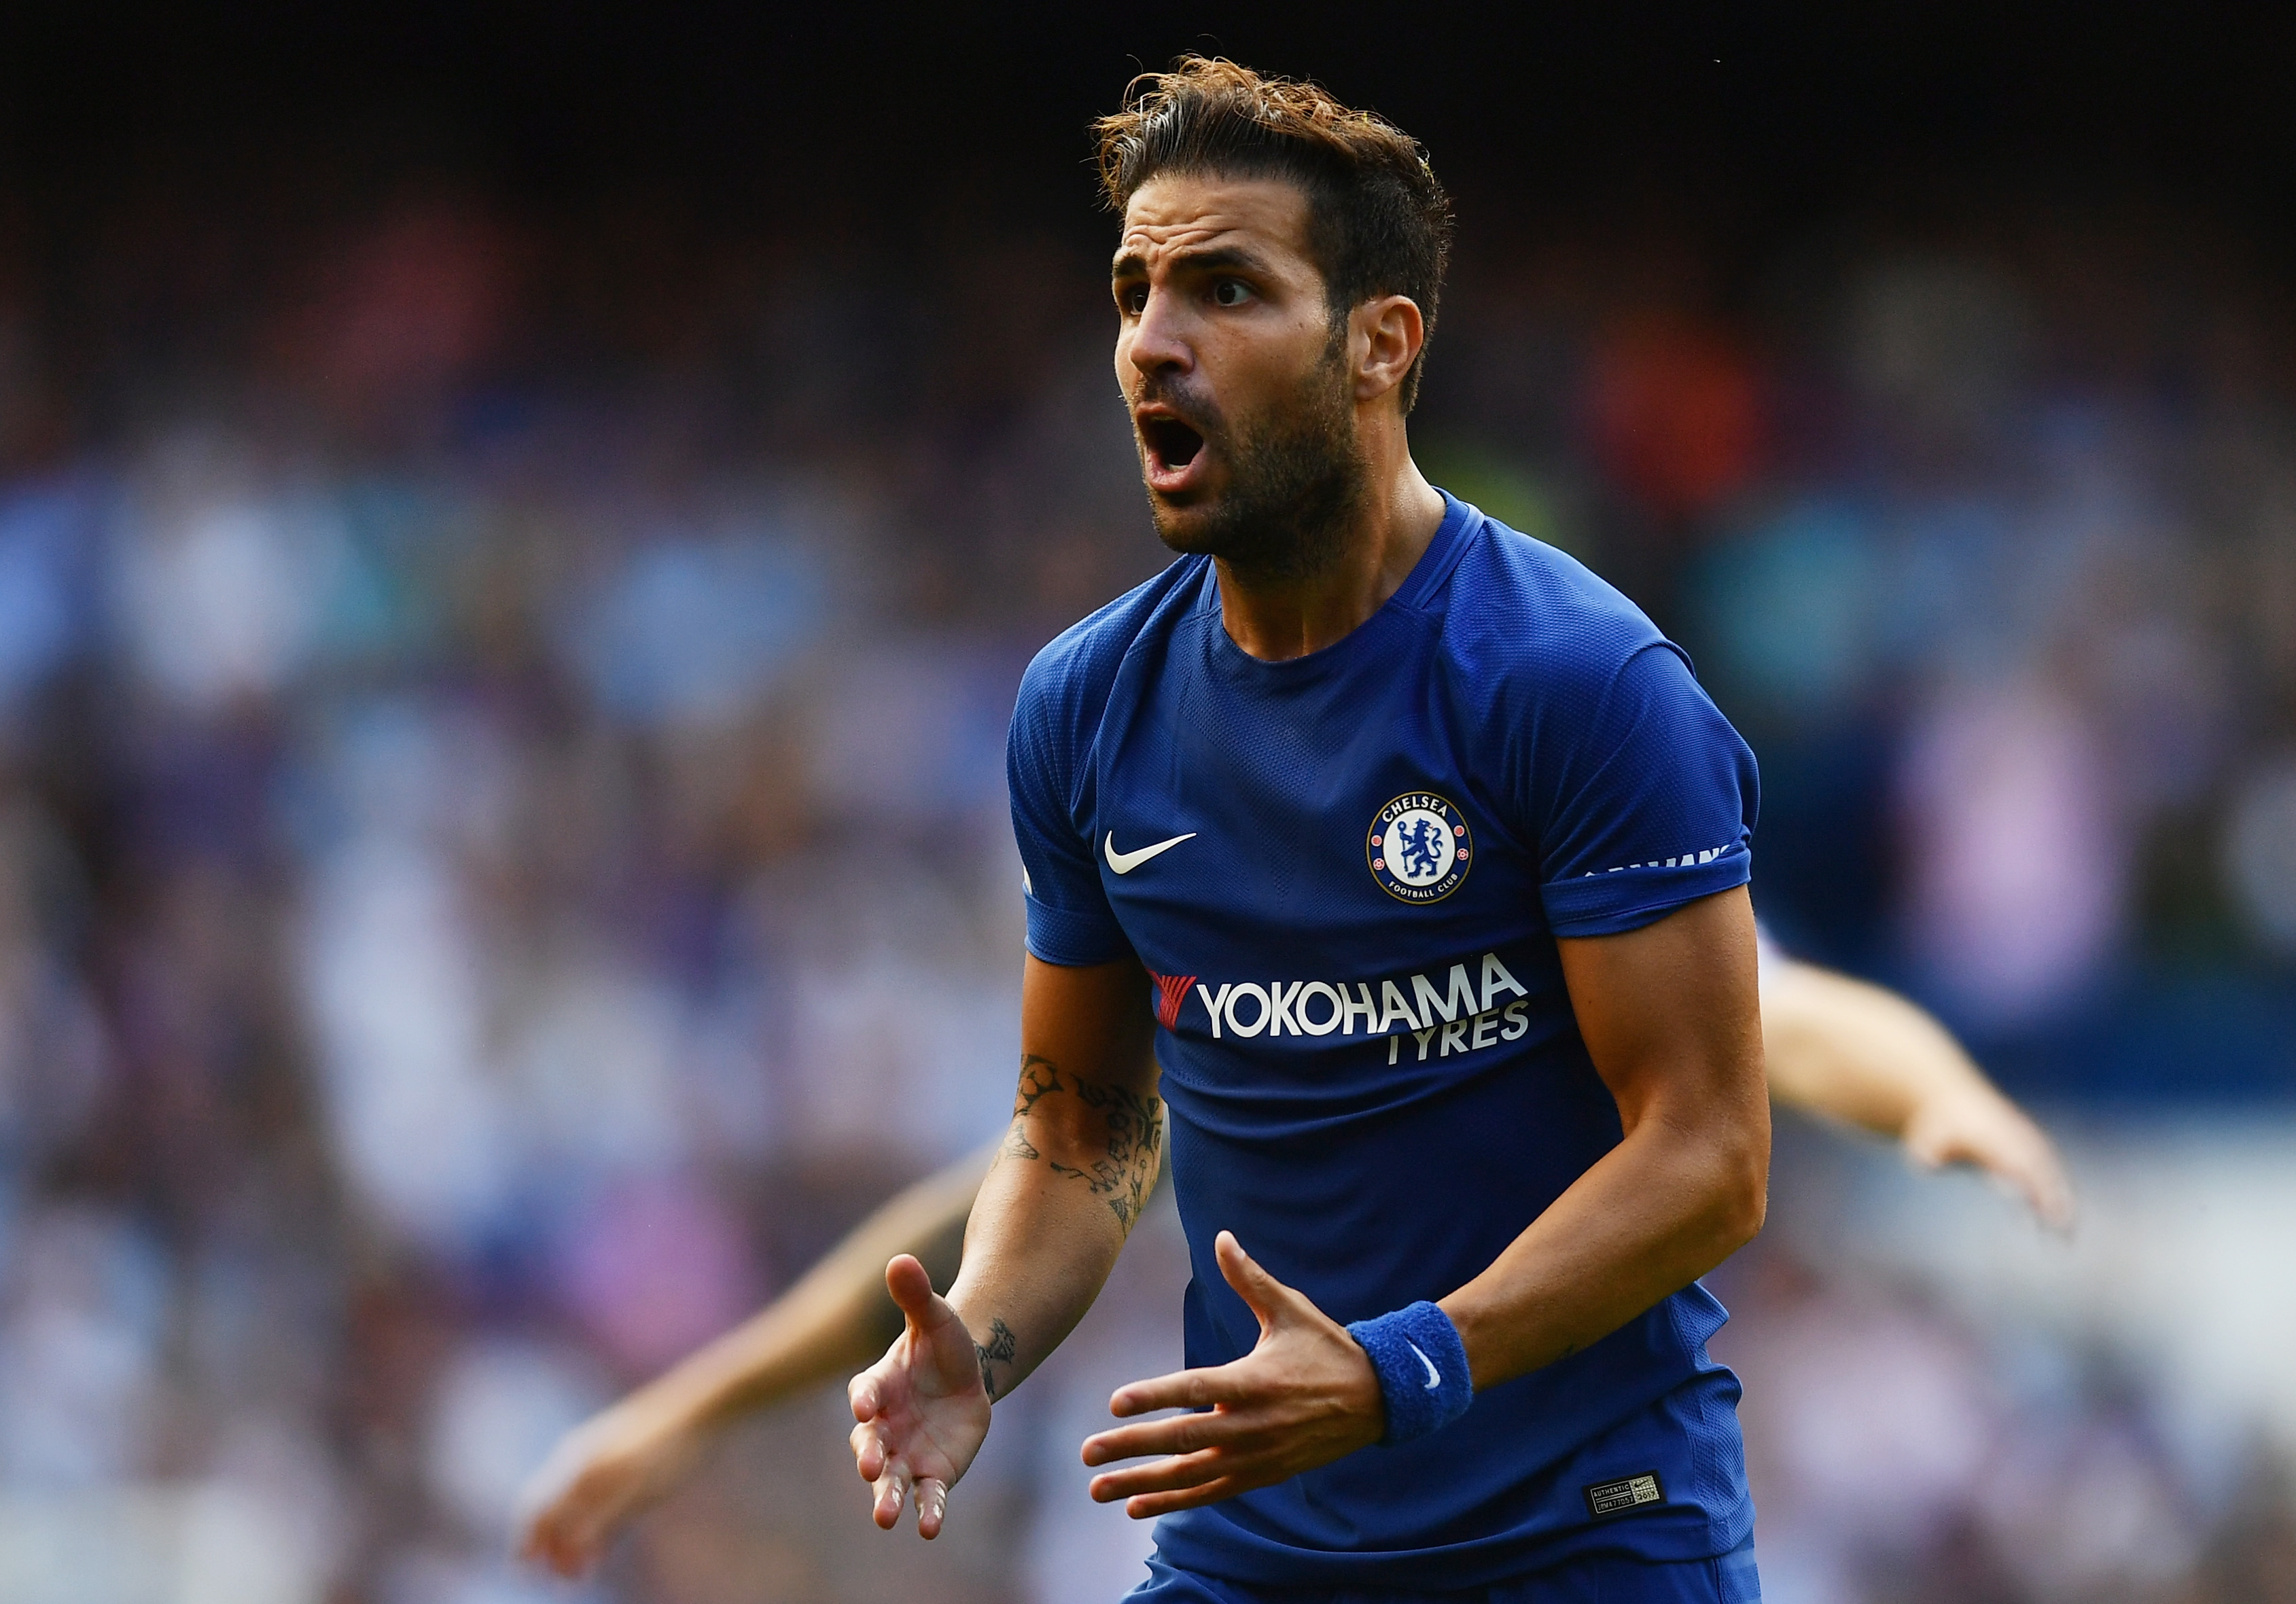 LONDON, ENGLAND - AUGUST 12:  Cesc Fabregas of Chelsea reacts to being sent off during the Premier League match between Chelsea and Burnley at Stamford Bridge on August 12, 2017 in London, England.  (Photo by Dan Mullan/Getty Images)